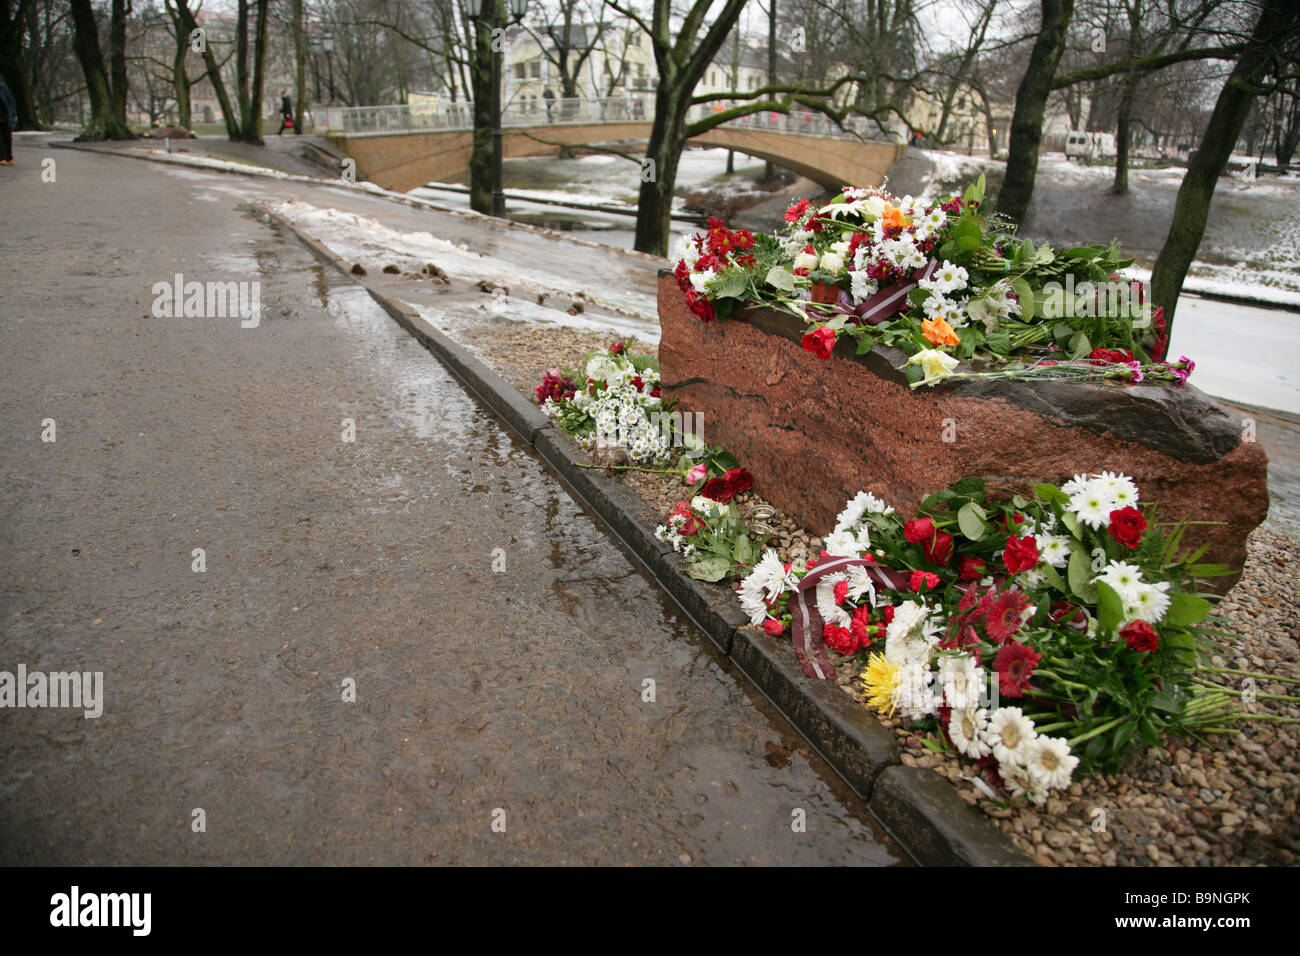 Monument stone to one of 5 Latvians shot dead by Soviet forces during Latvian independence demonstrations in 1991, Riga, Latvia Stock Photo